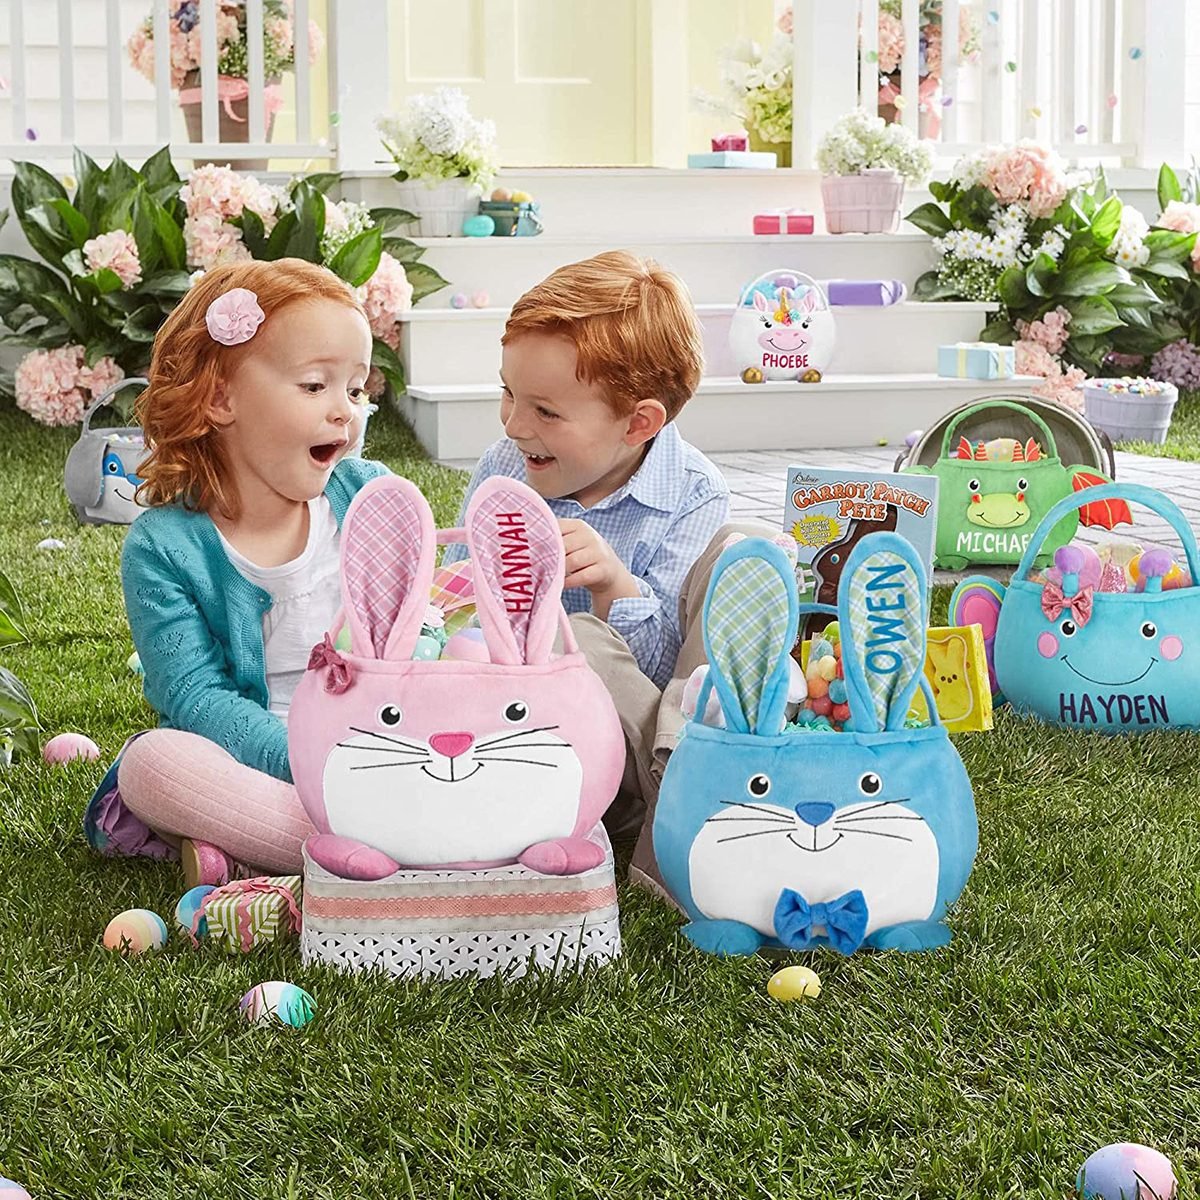 26 Easter Basket Ideas for Kids 2022 — Gift Ideas for Boys and Girls